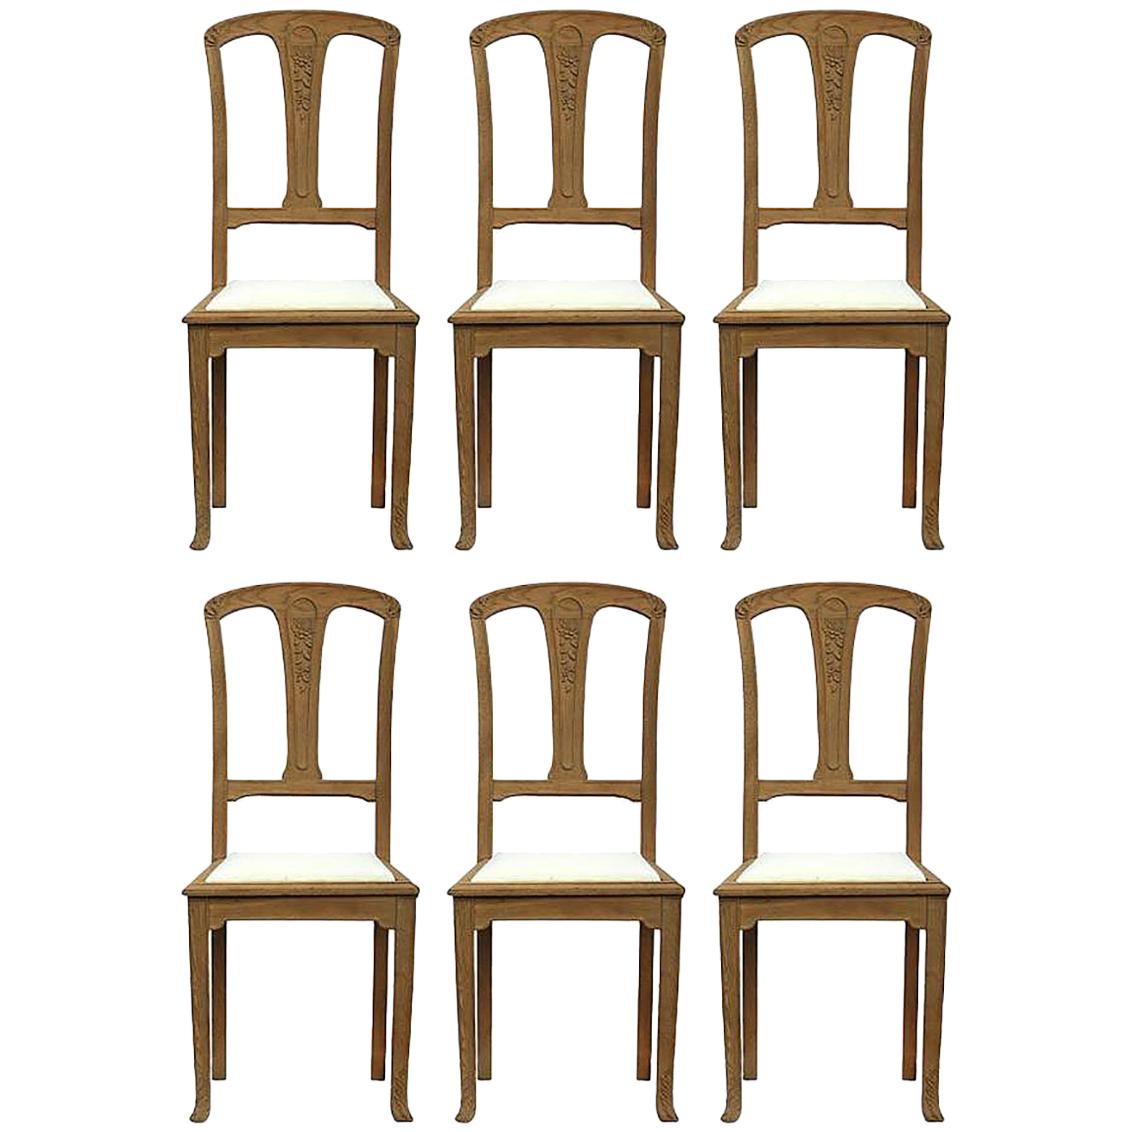 Six Art Nouveau Dining Chairs French Arts and Crafts Oak, circa 1900